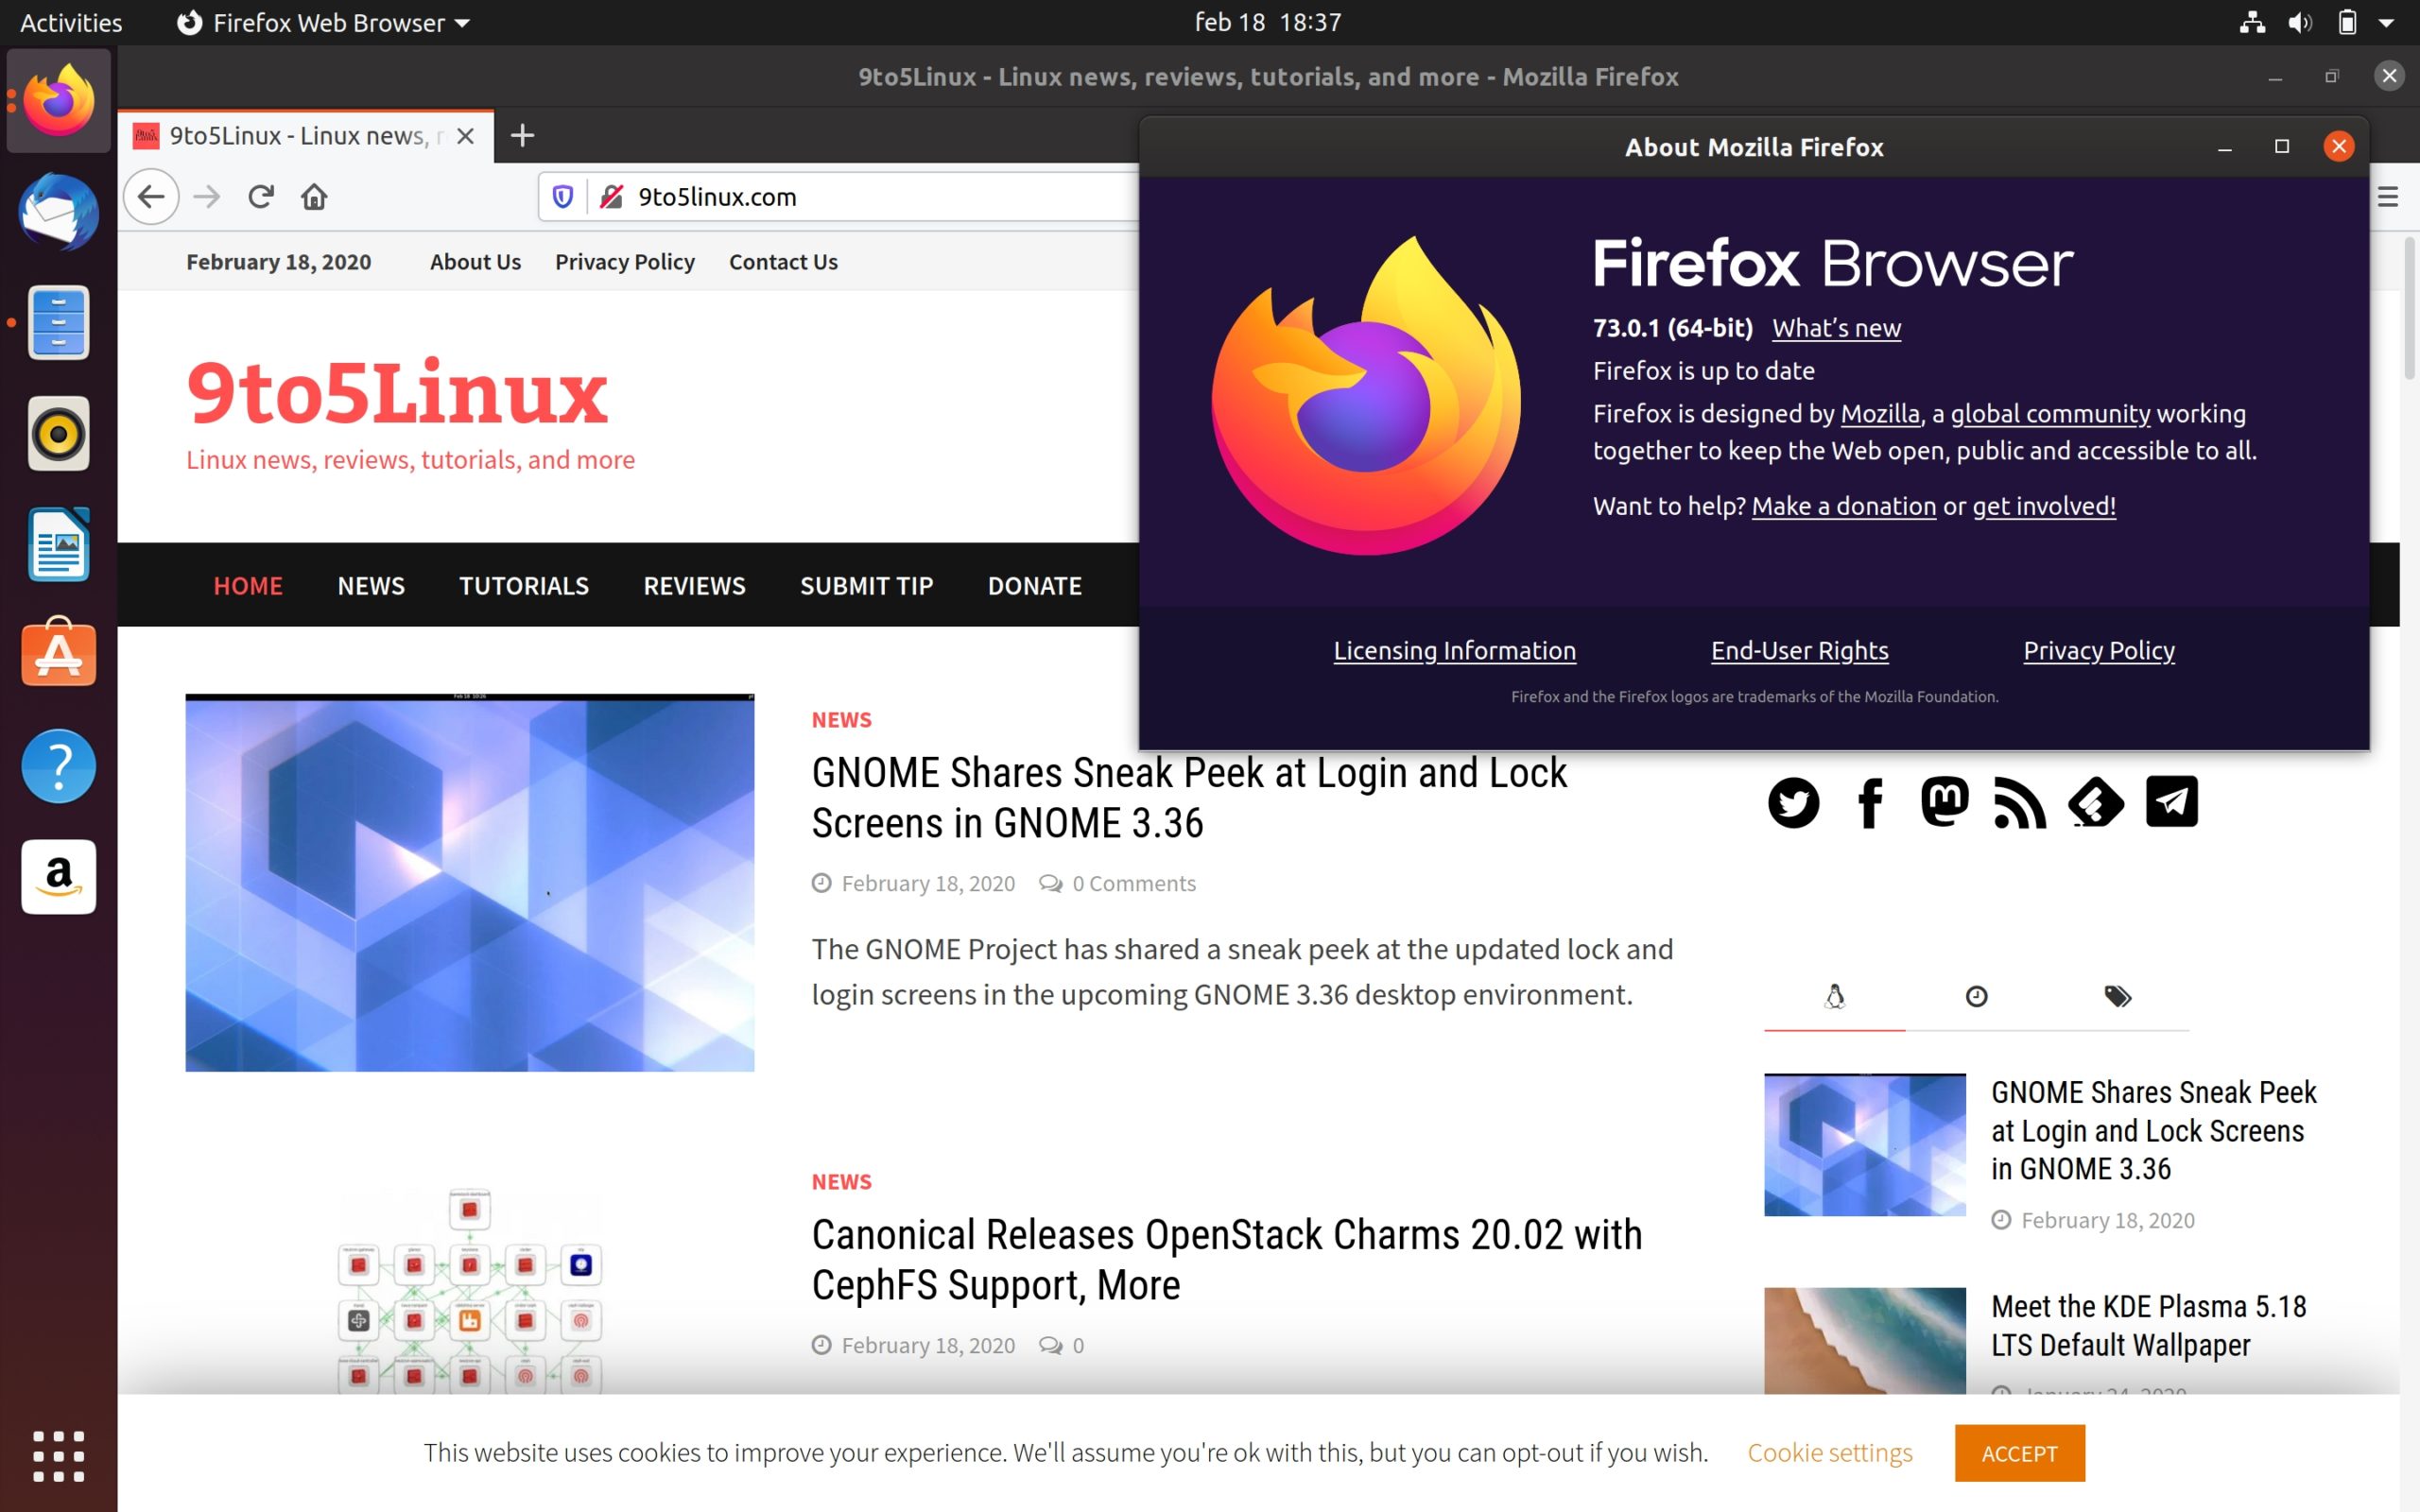 Firefox 73.0.1 Fixes Linux Crashes When Playing Encrypted Content